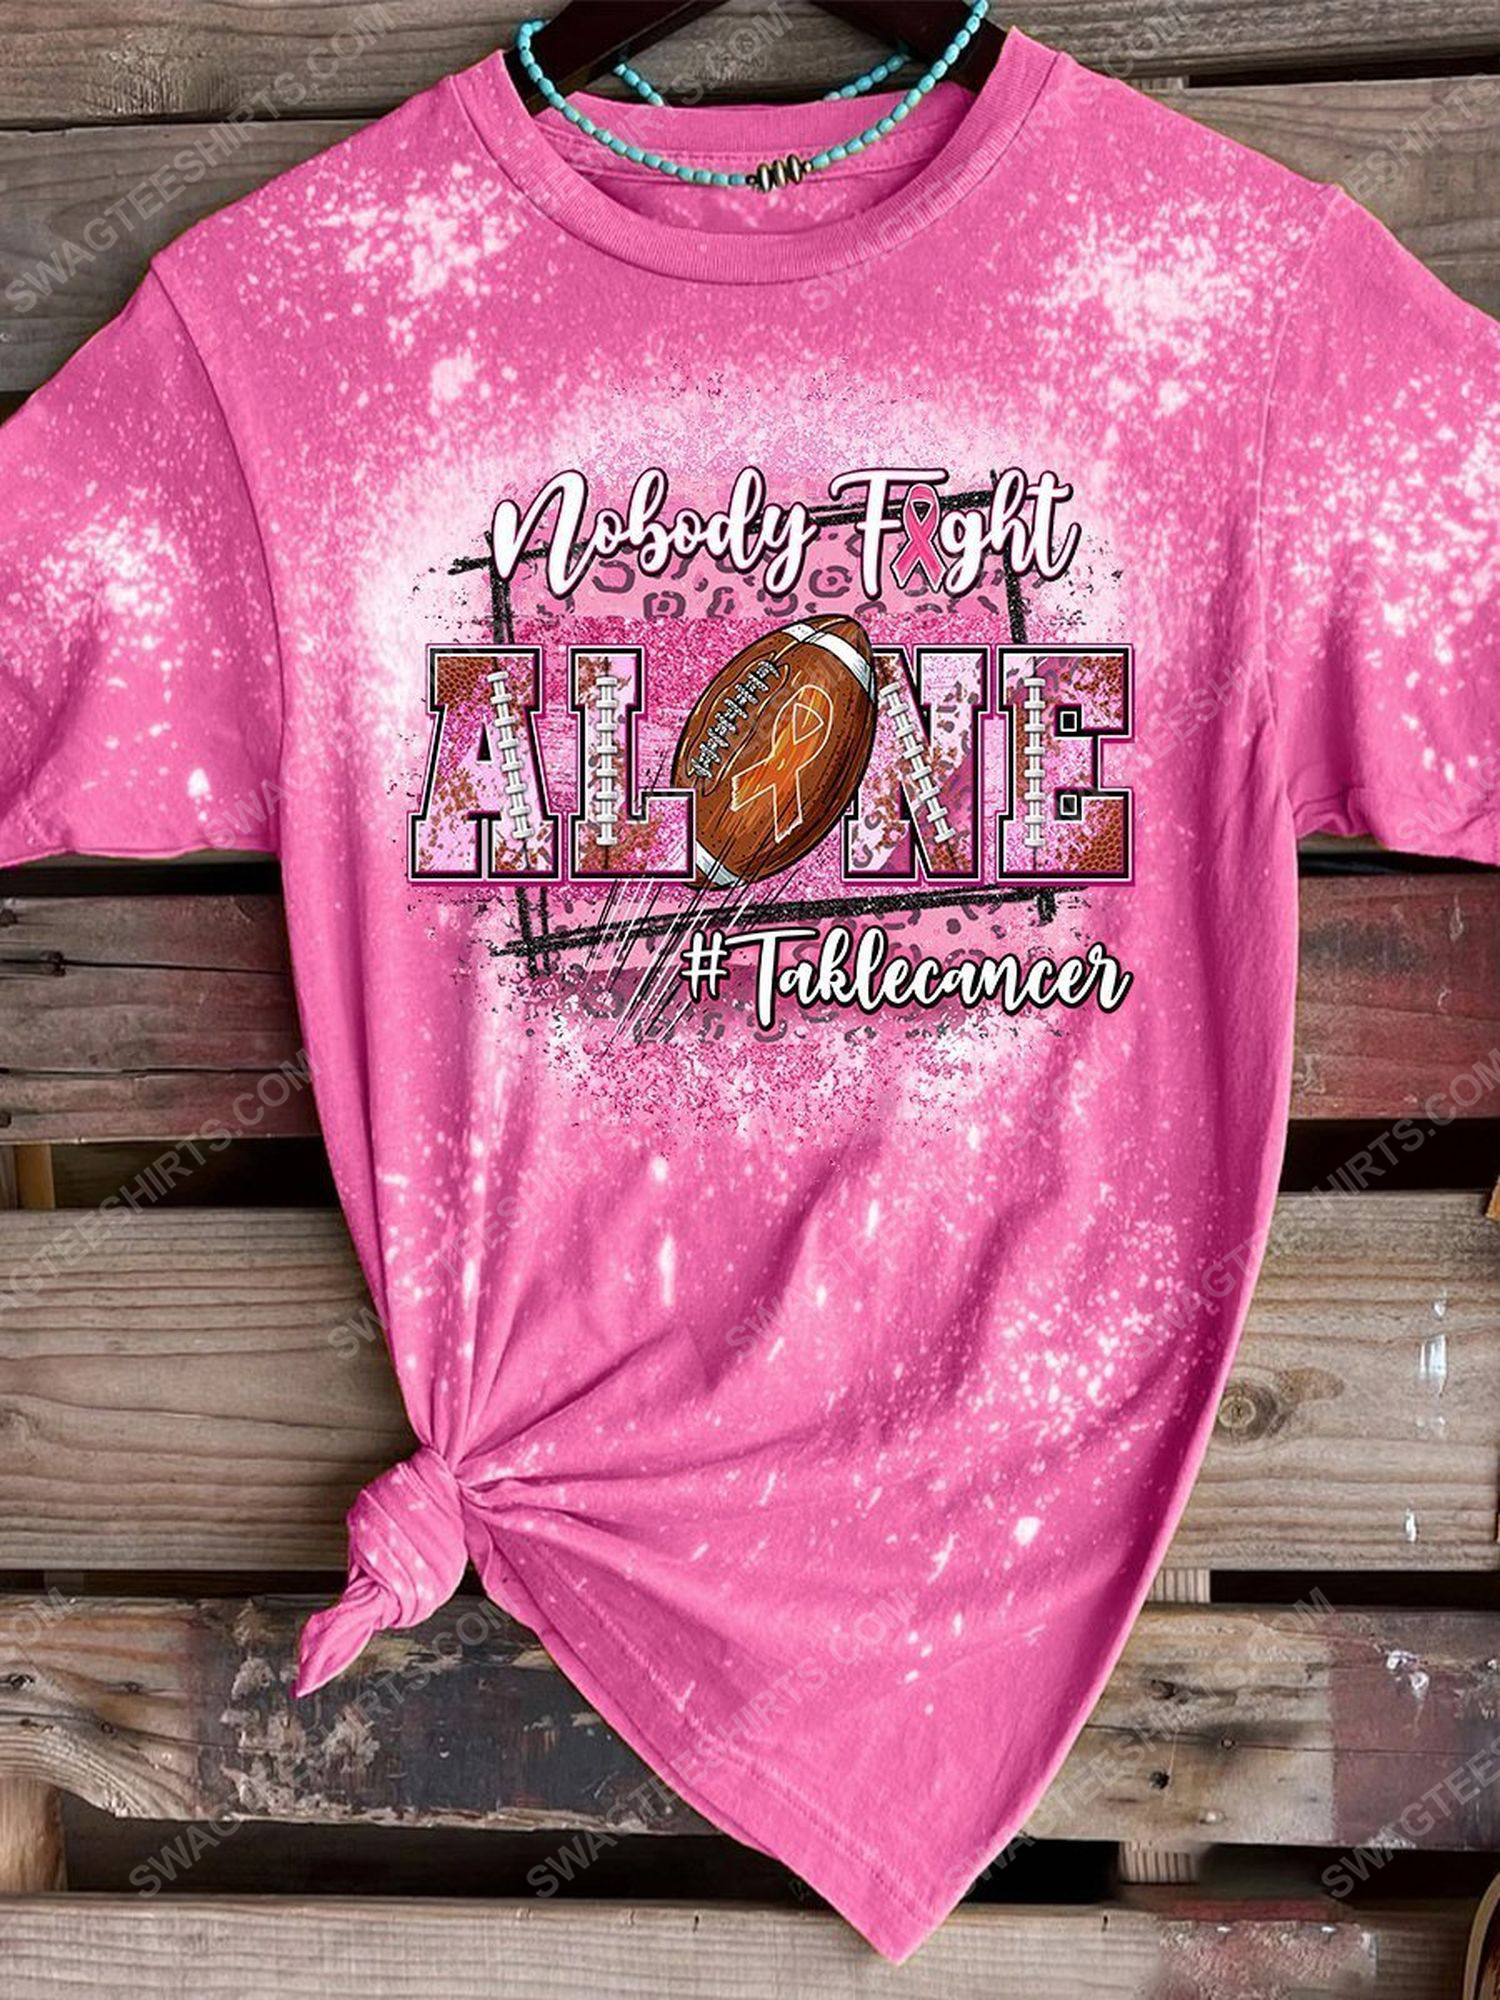 Breast cancer nobody fights alone bleached shirt 1 - Copy (2)